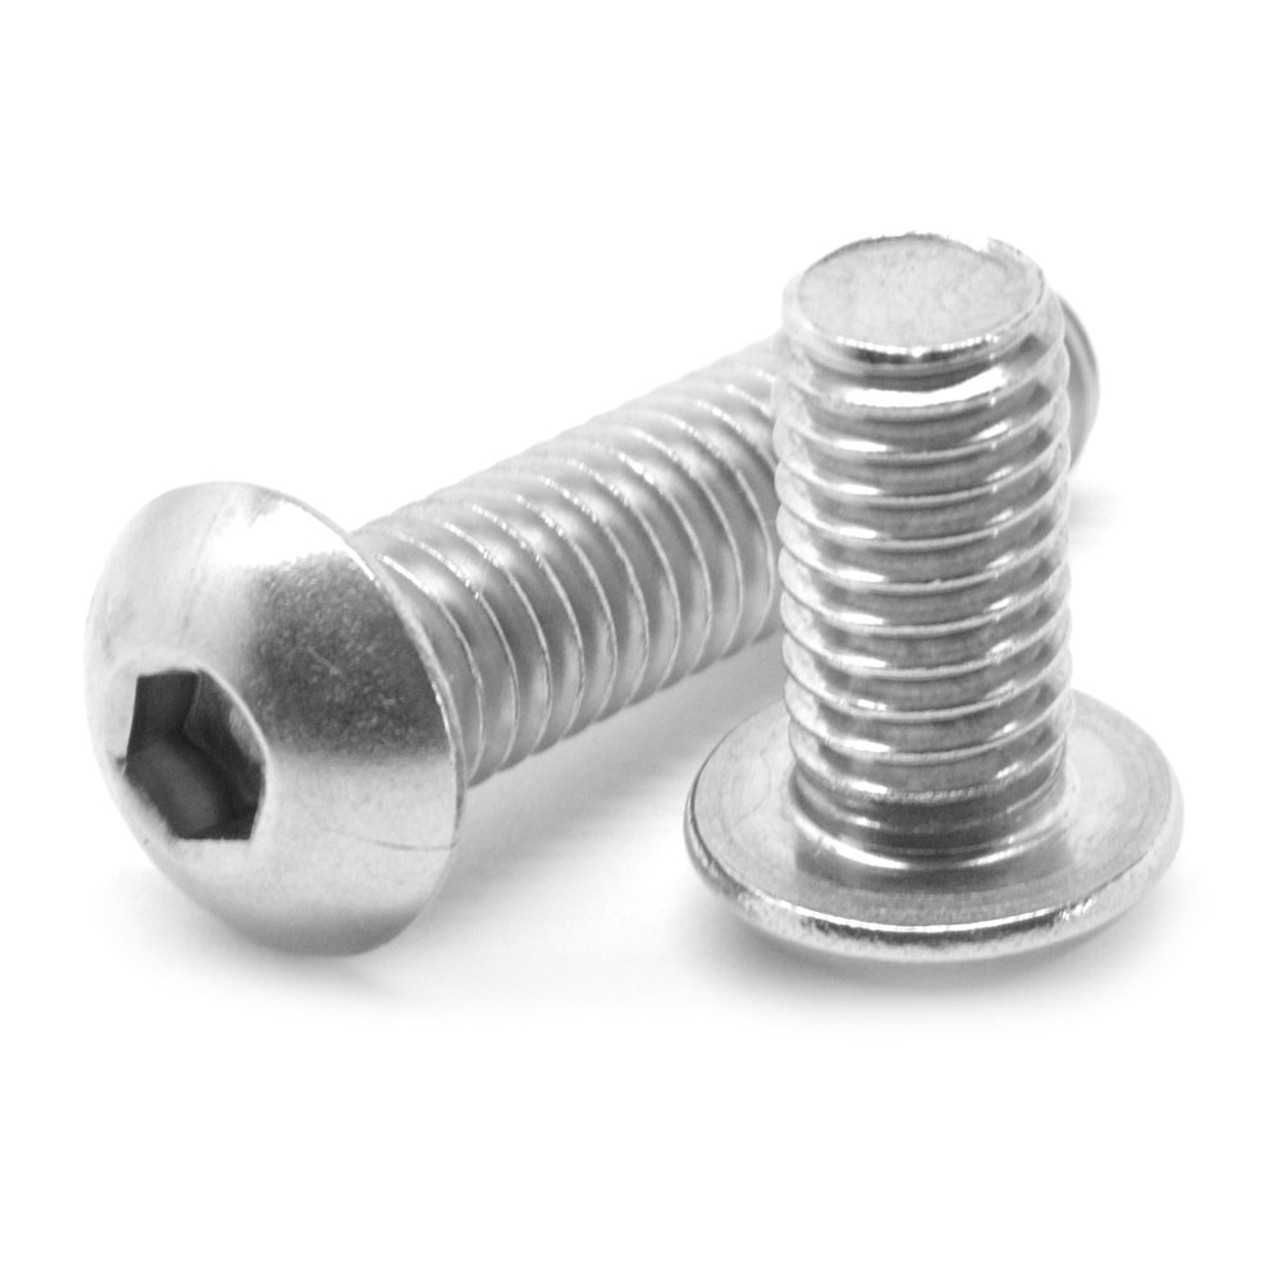 M3 x 0.50 x 5 MM (FT) Coarse Thread ISO 7380 Socket Button Head Cap Screw Stainless Steel 316